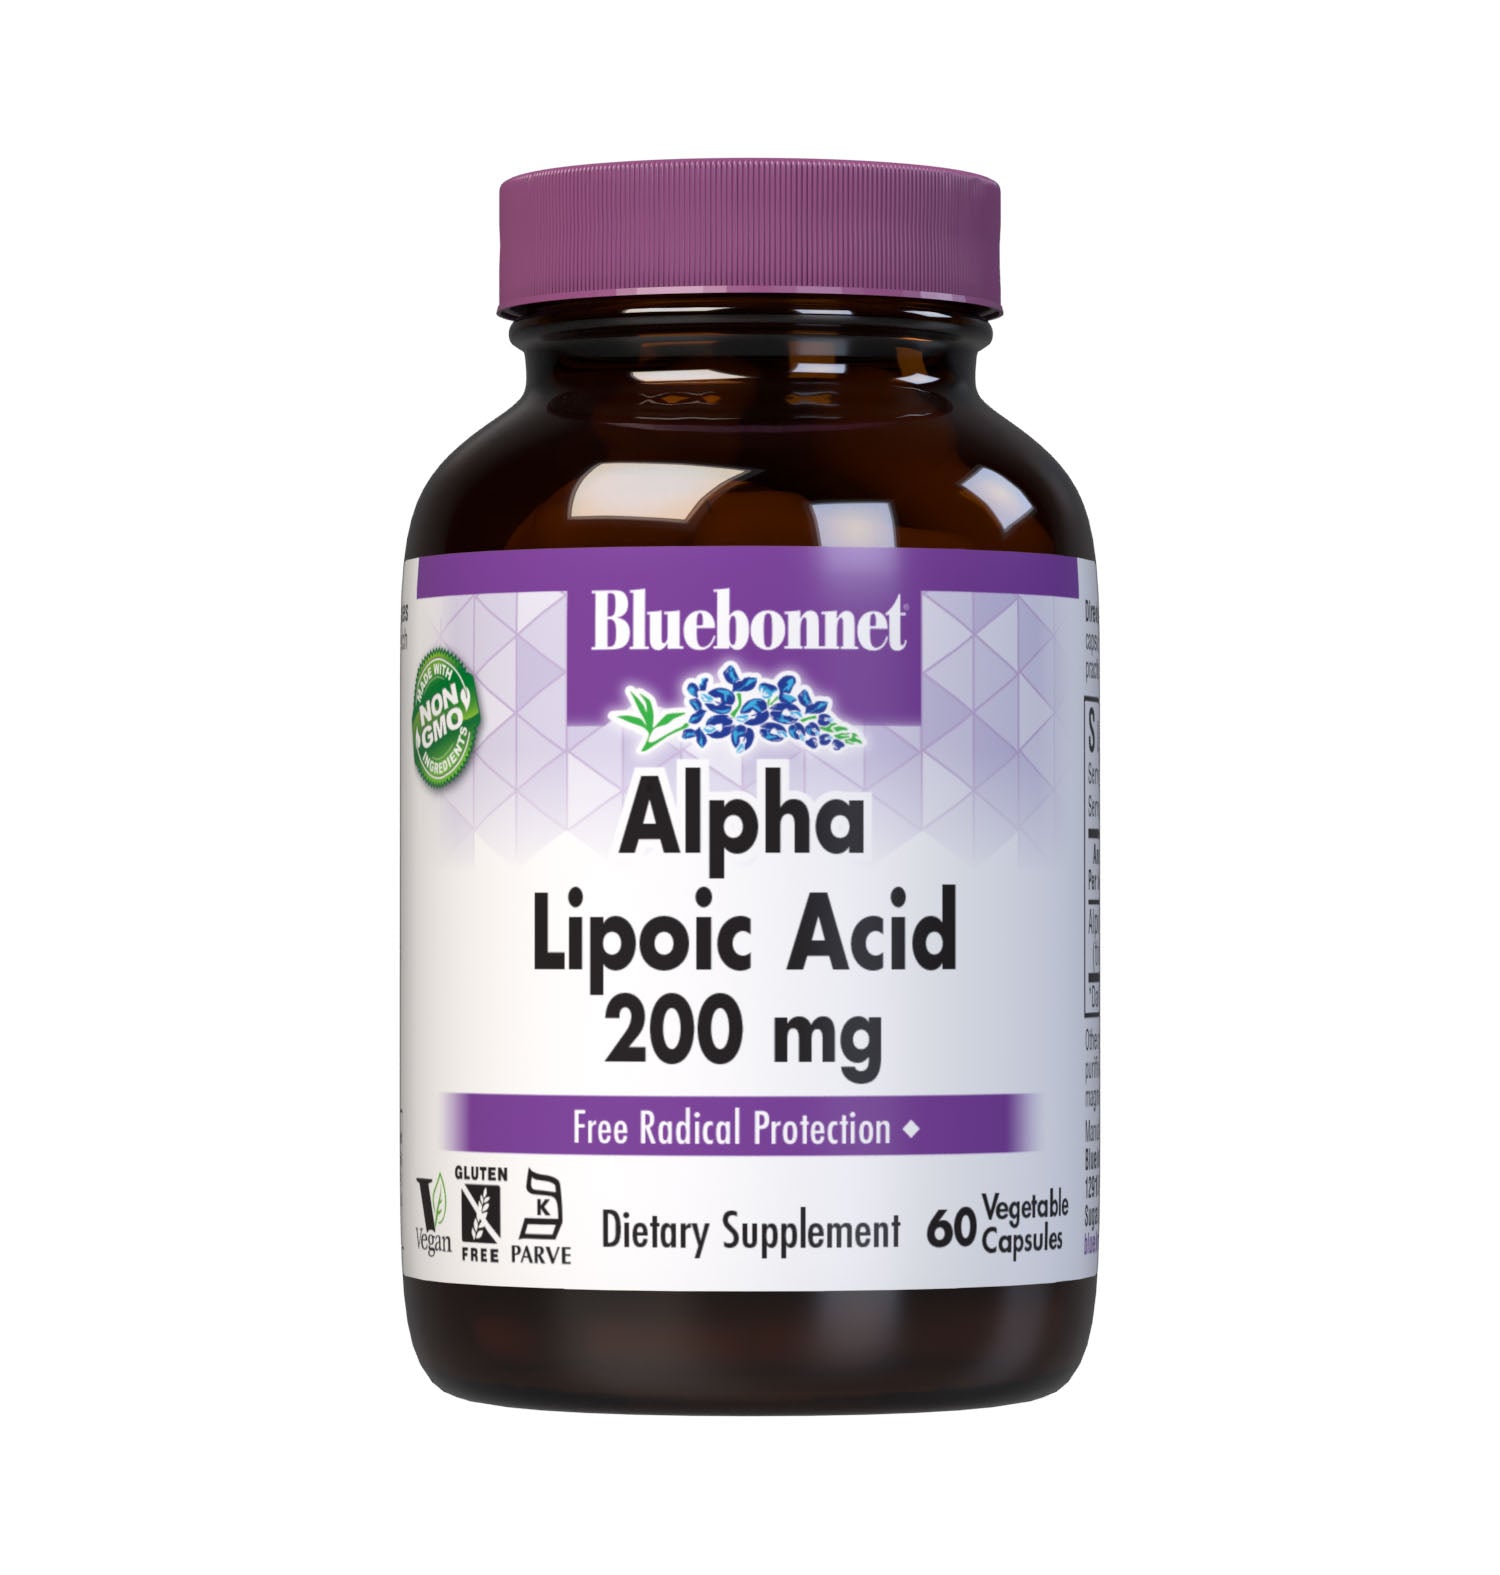 Bluebonnet’s Alpha Lipoic Acid 200 mg 60 Vegetable Capsules are formulated with alpha lipoic acid from thiotic acid. Alpha lipoic acid is a unique antioxidant that is both fat-soluble and water-soluble, and is known for its free radical scavenger activity. #size_60 count